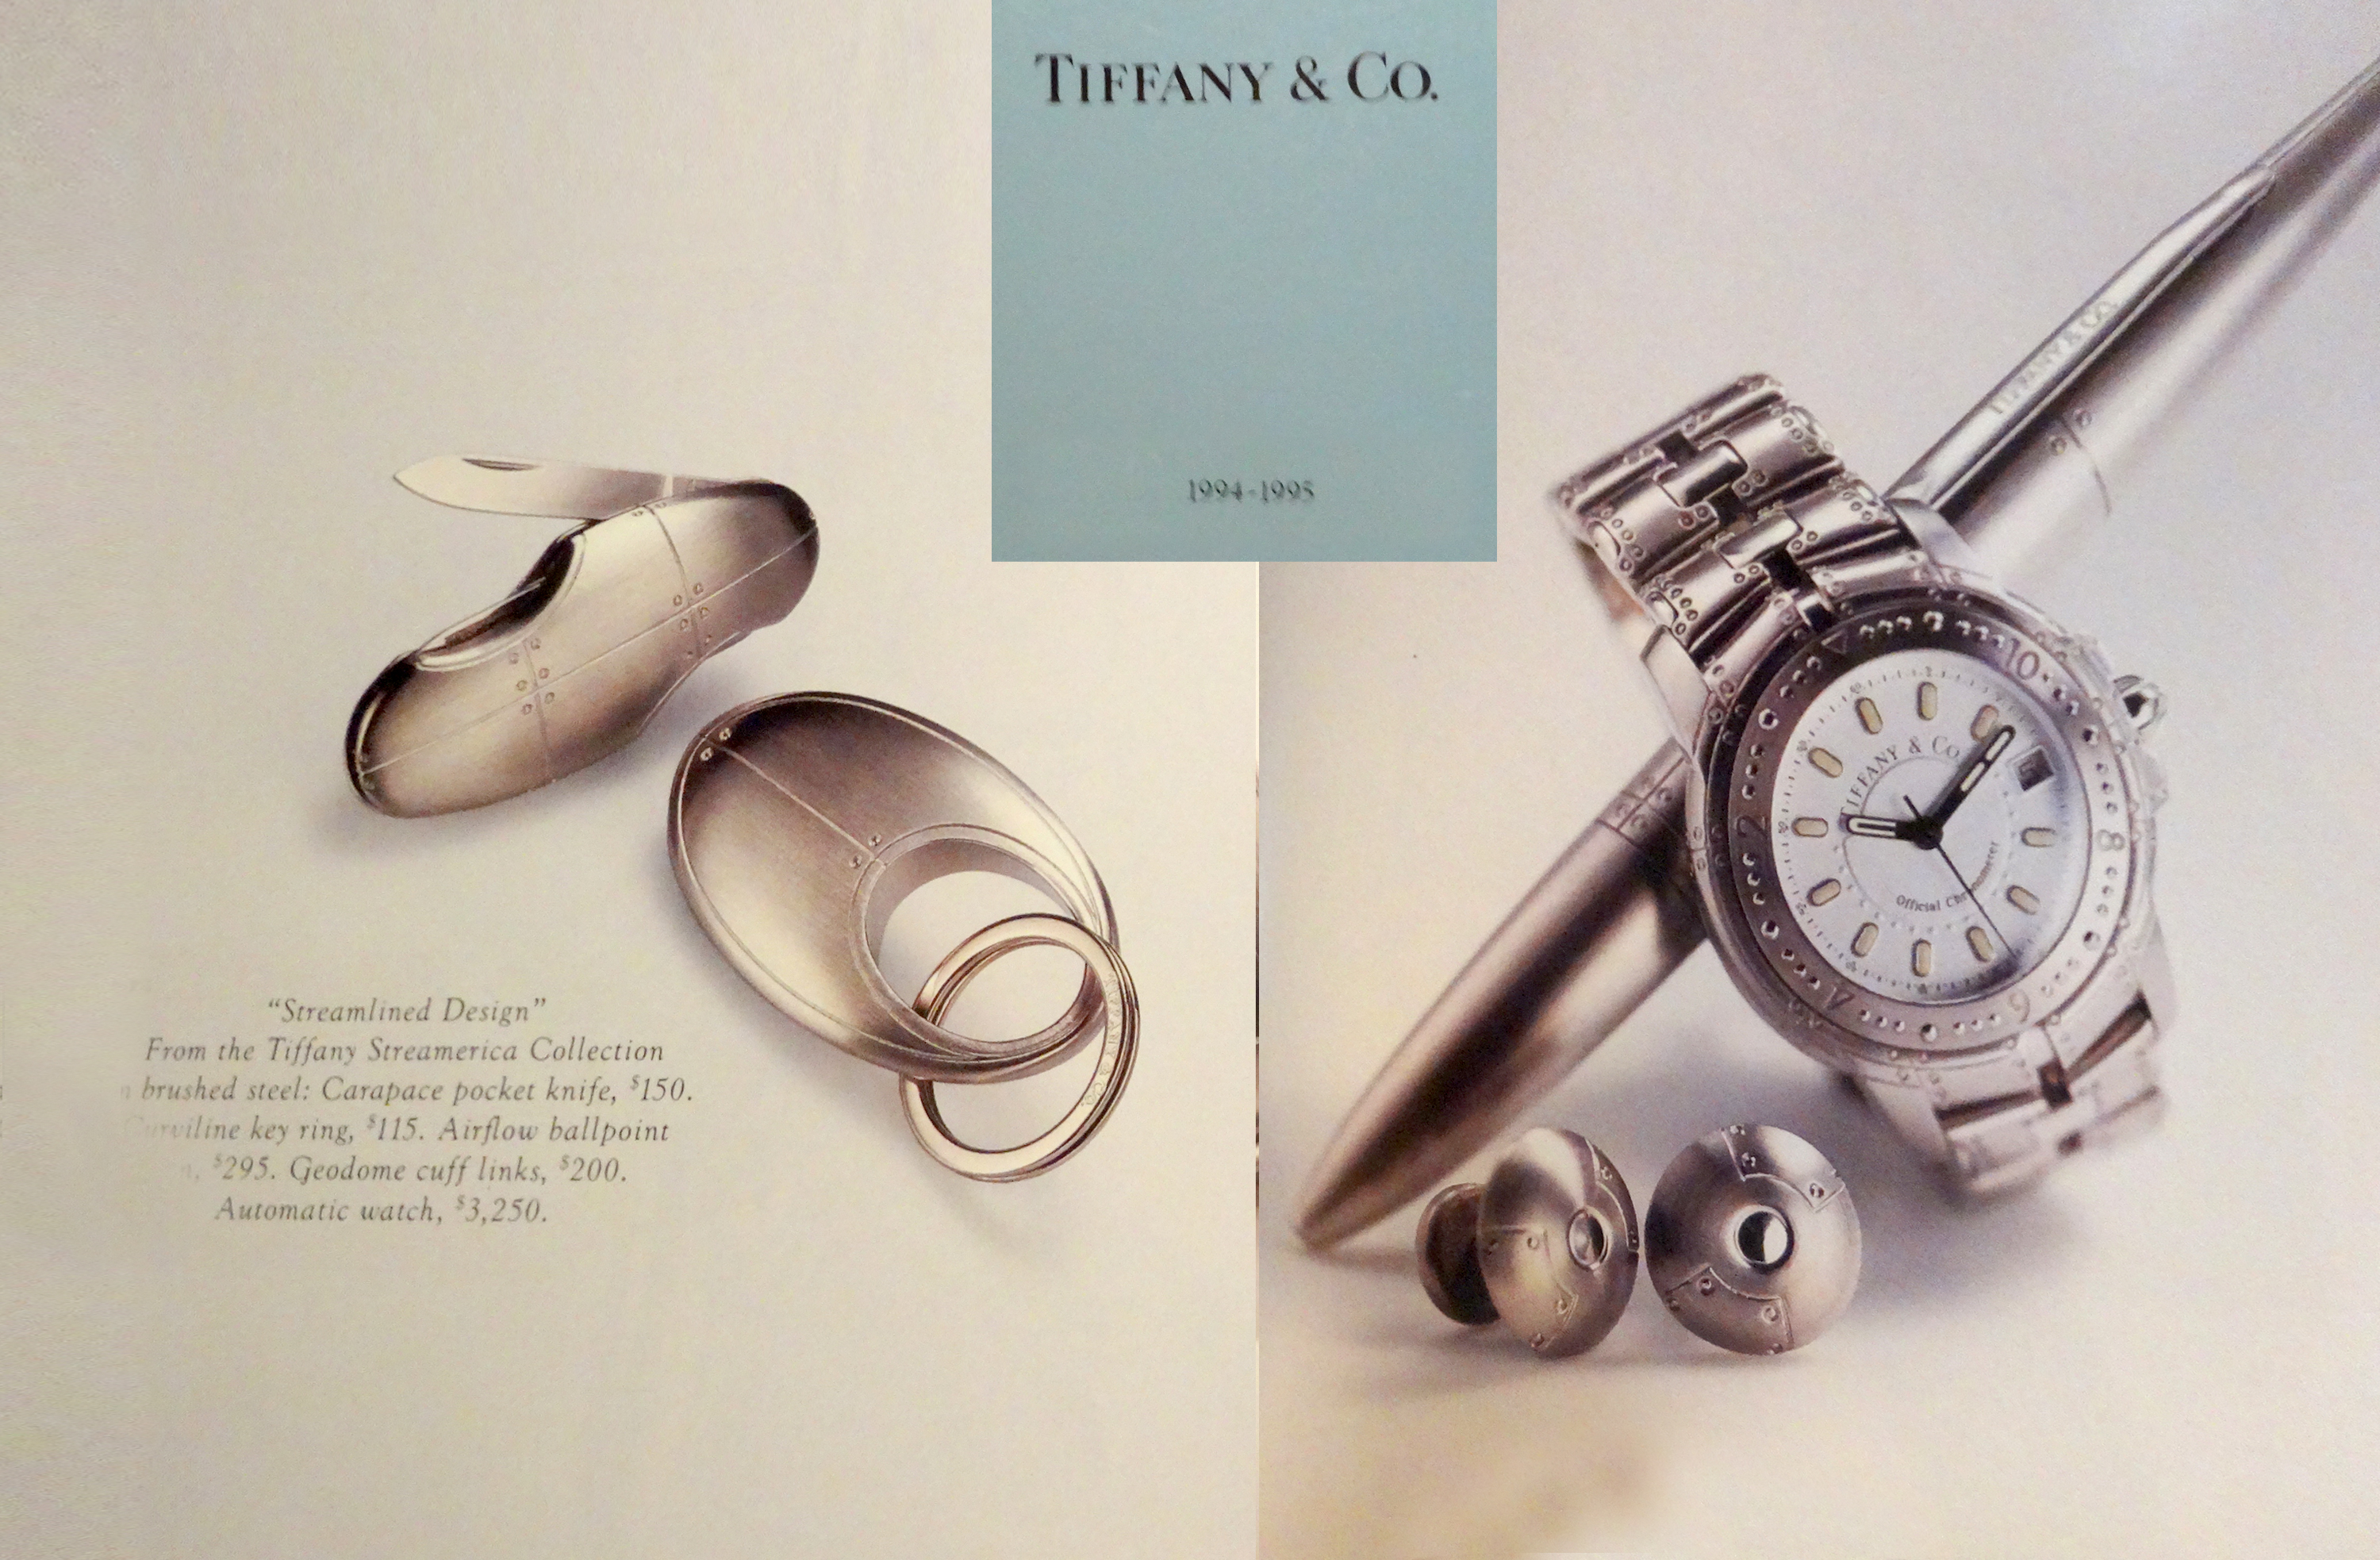 1994 Streamerica Blue Catalog by Tiffany & Co. Tiffany & and Co. Stainless Steel Carapace Pocket Knife, Curviline Key chain, Ballpoint pen, Geodome Cufflinks, Automatic Watch. Price prices